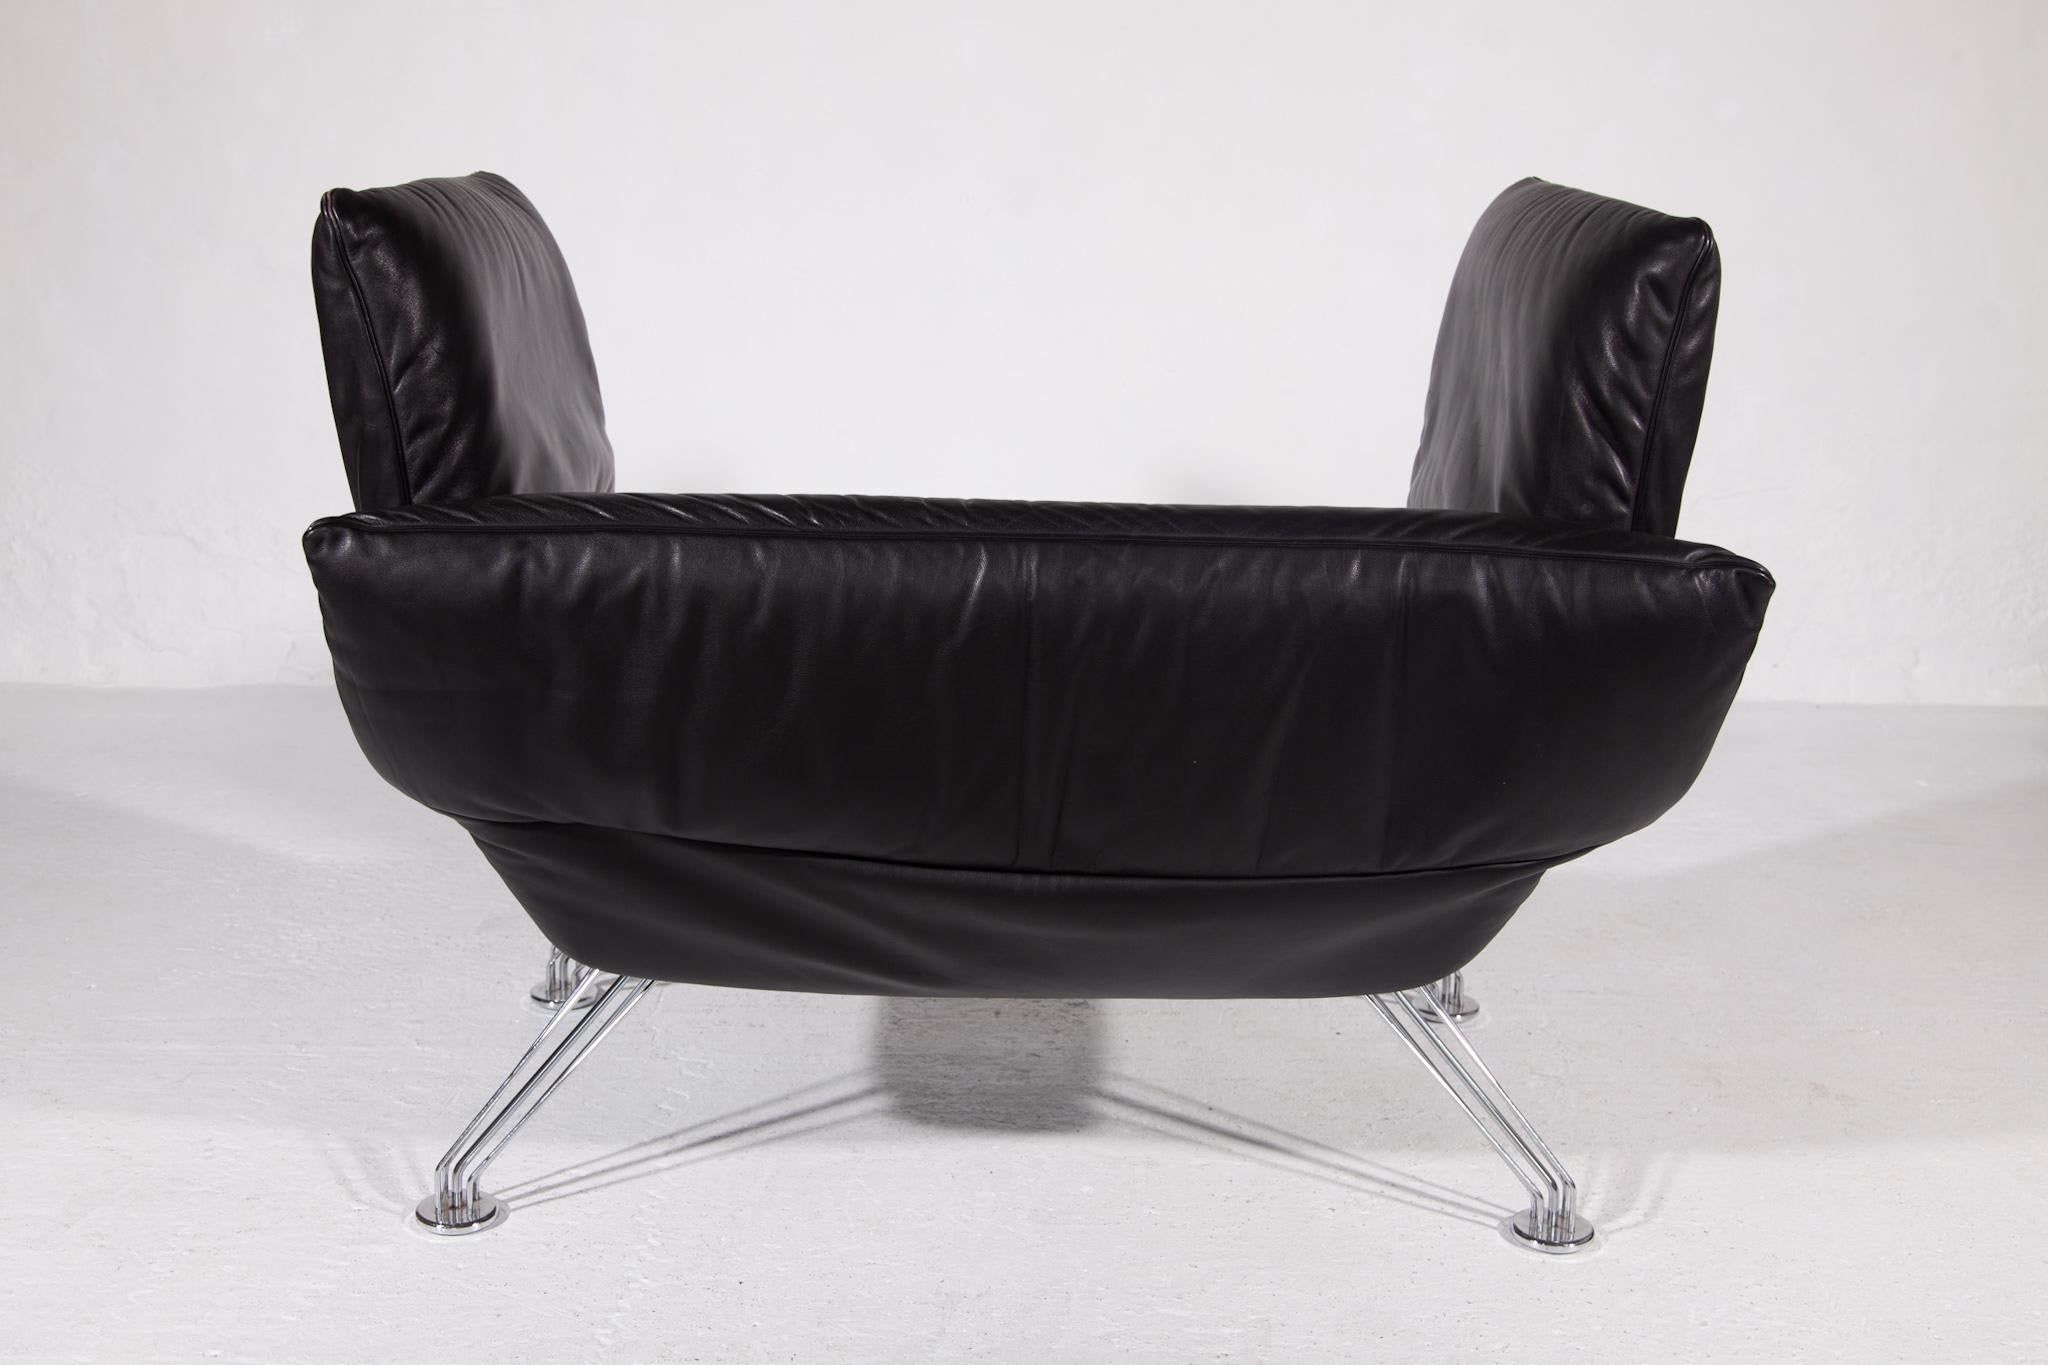 Hand-Crafted Vintage Black Ds-142 Armchair, Daybed Designed by Winfried Totzek for De Seden